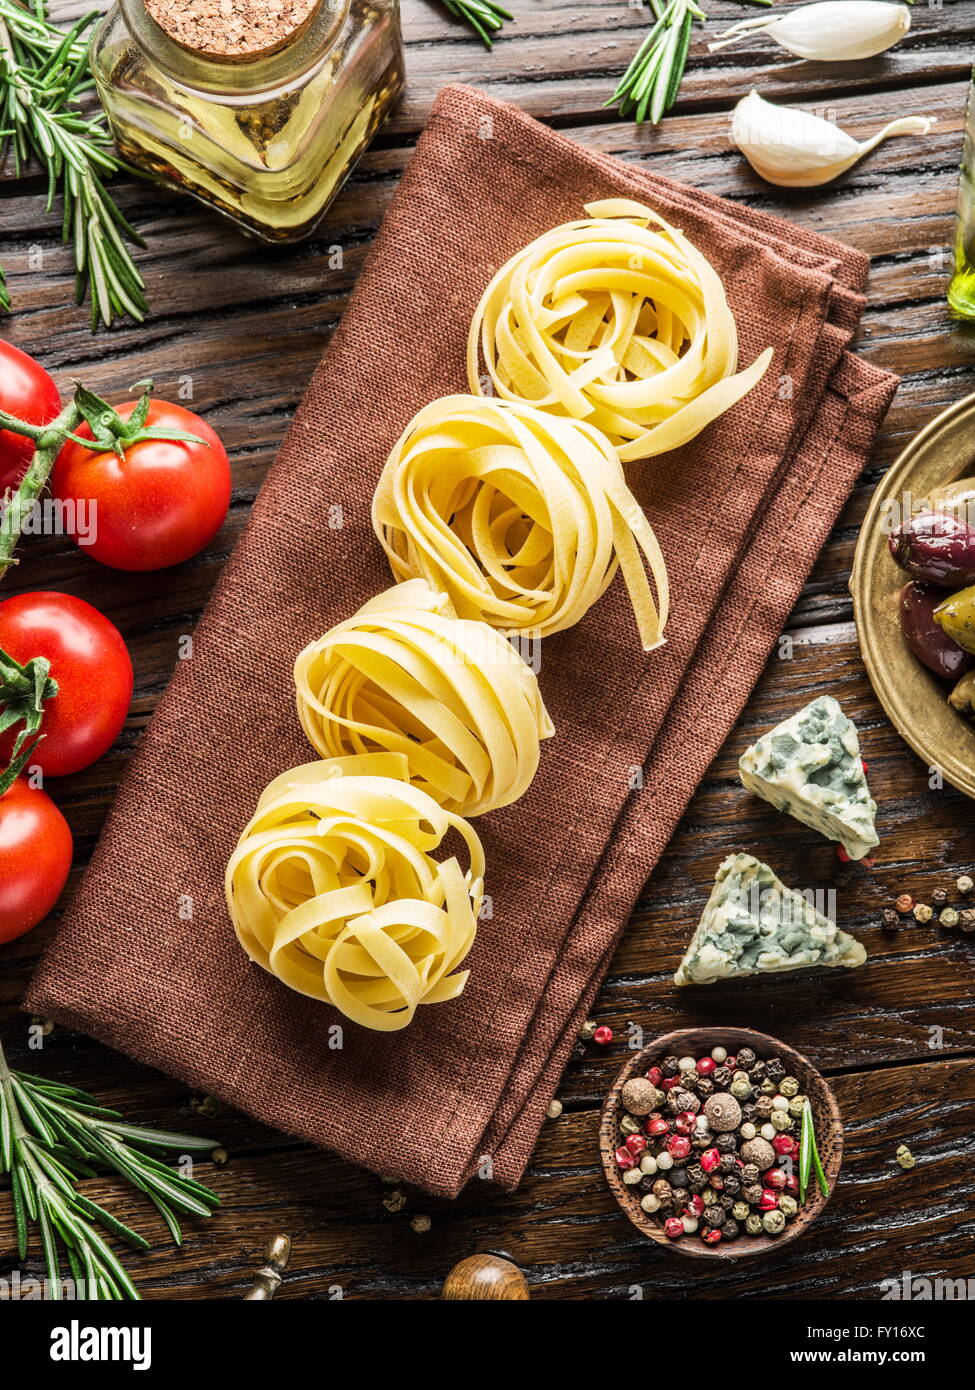 Pasta ingredients. Cherry-tomatoes, spaghetti pasta, rosemary and spices on the wooden table. Stock Photo